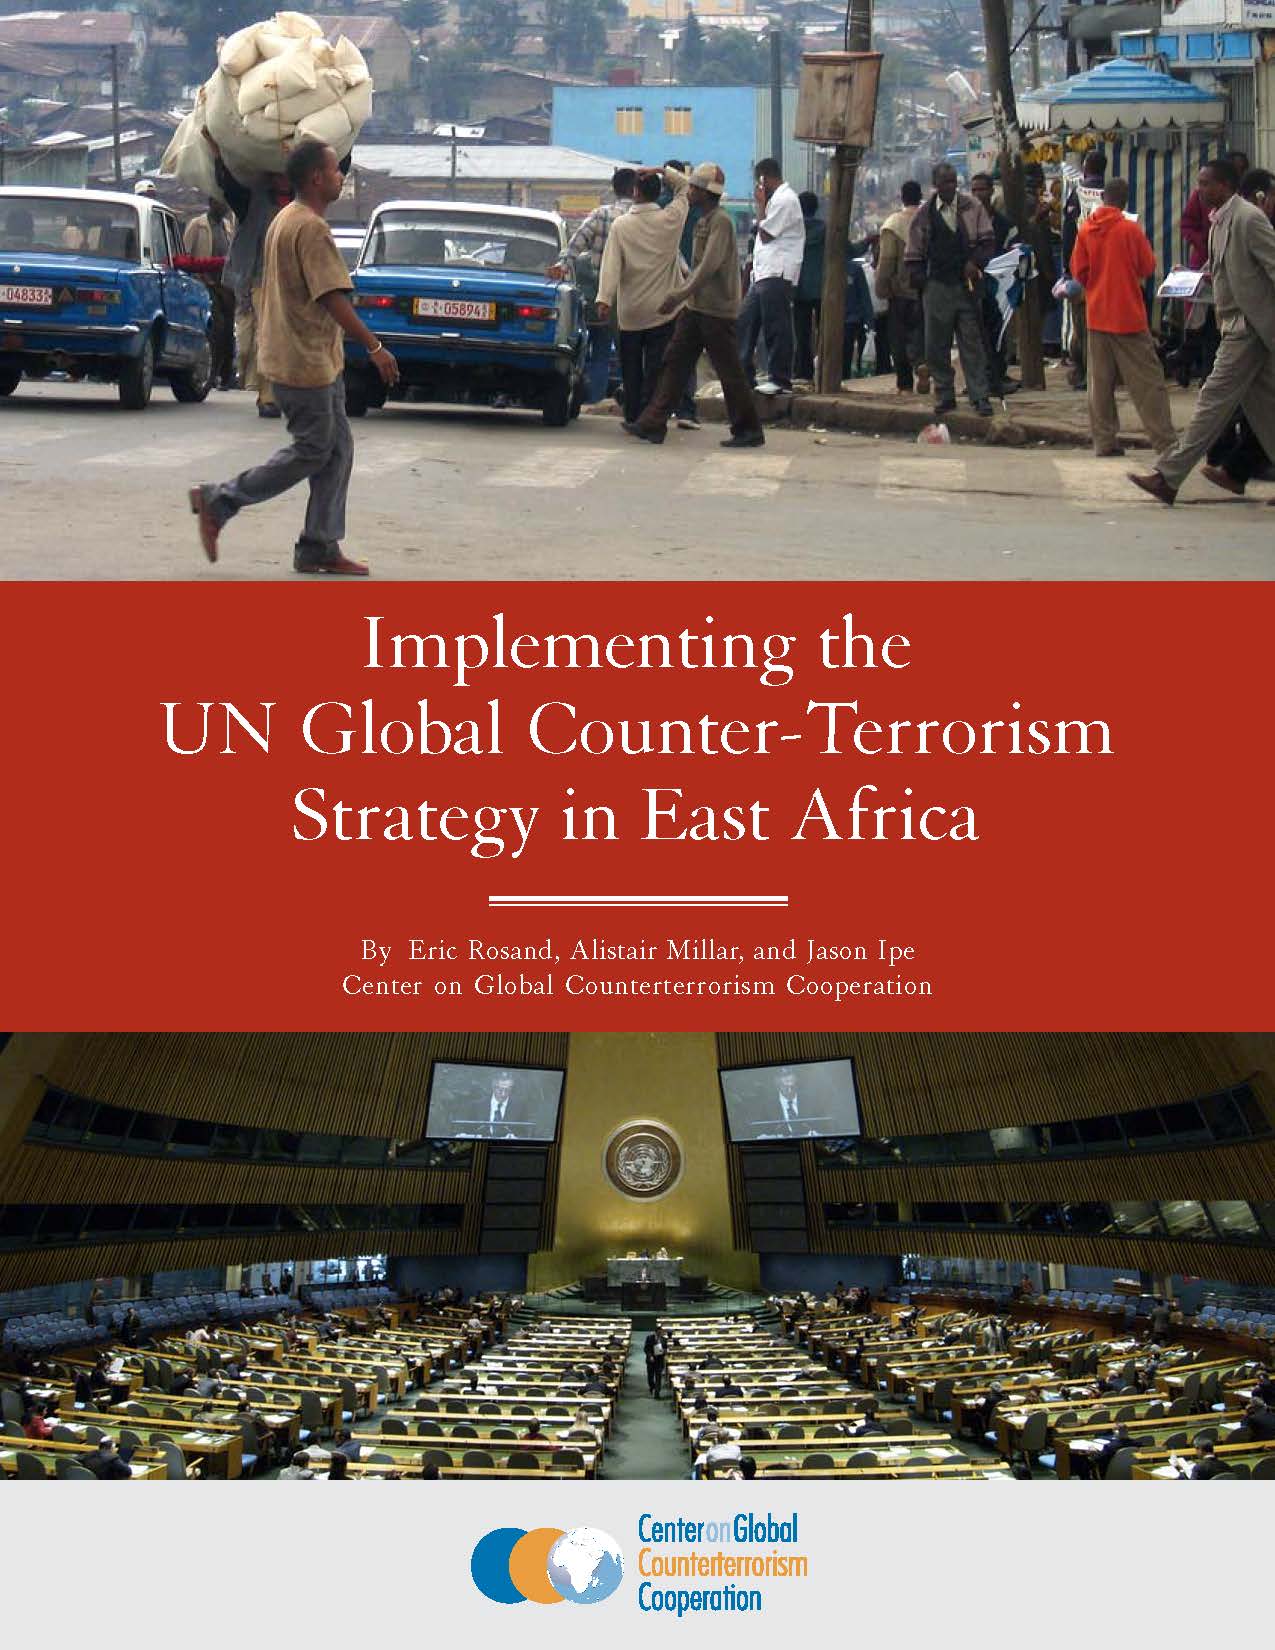 Implementing the UN Global Counter-Terrorism Strategy in East Africa